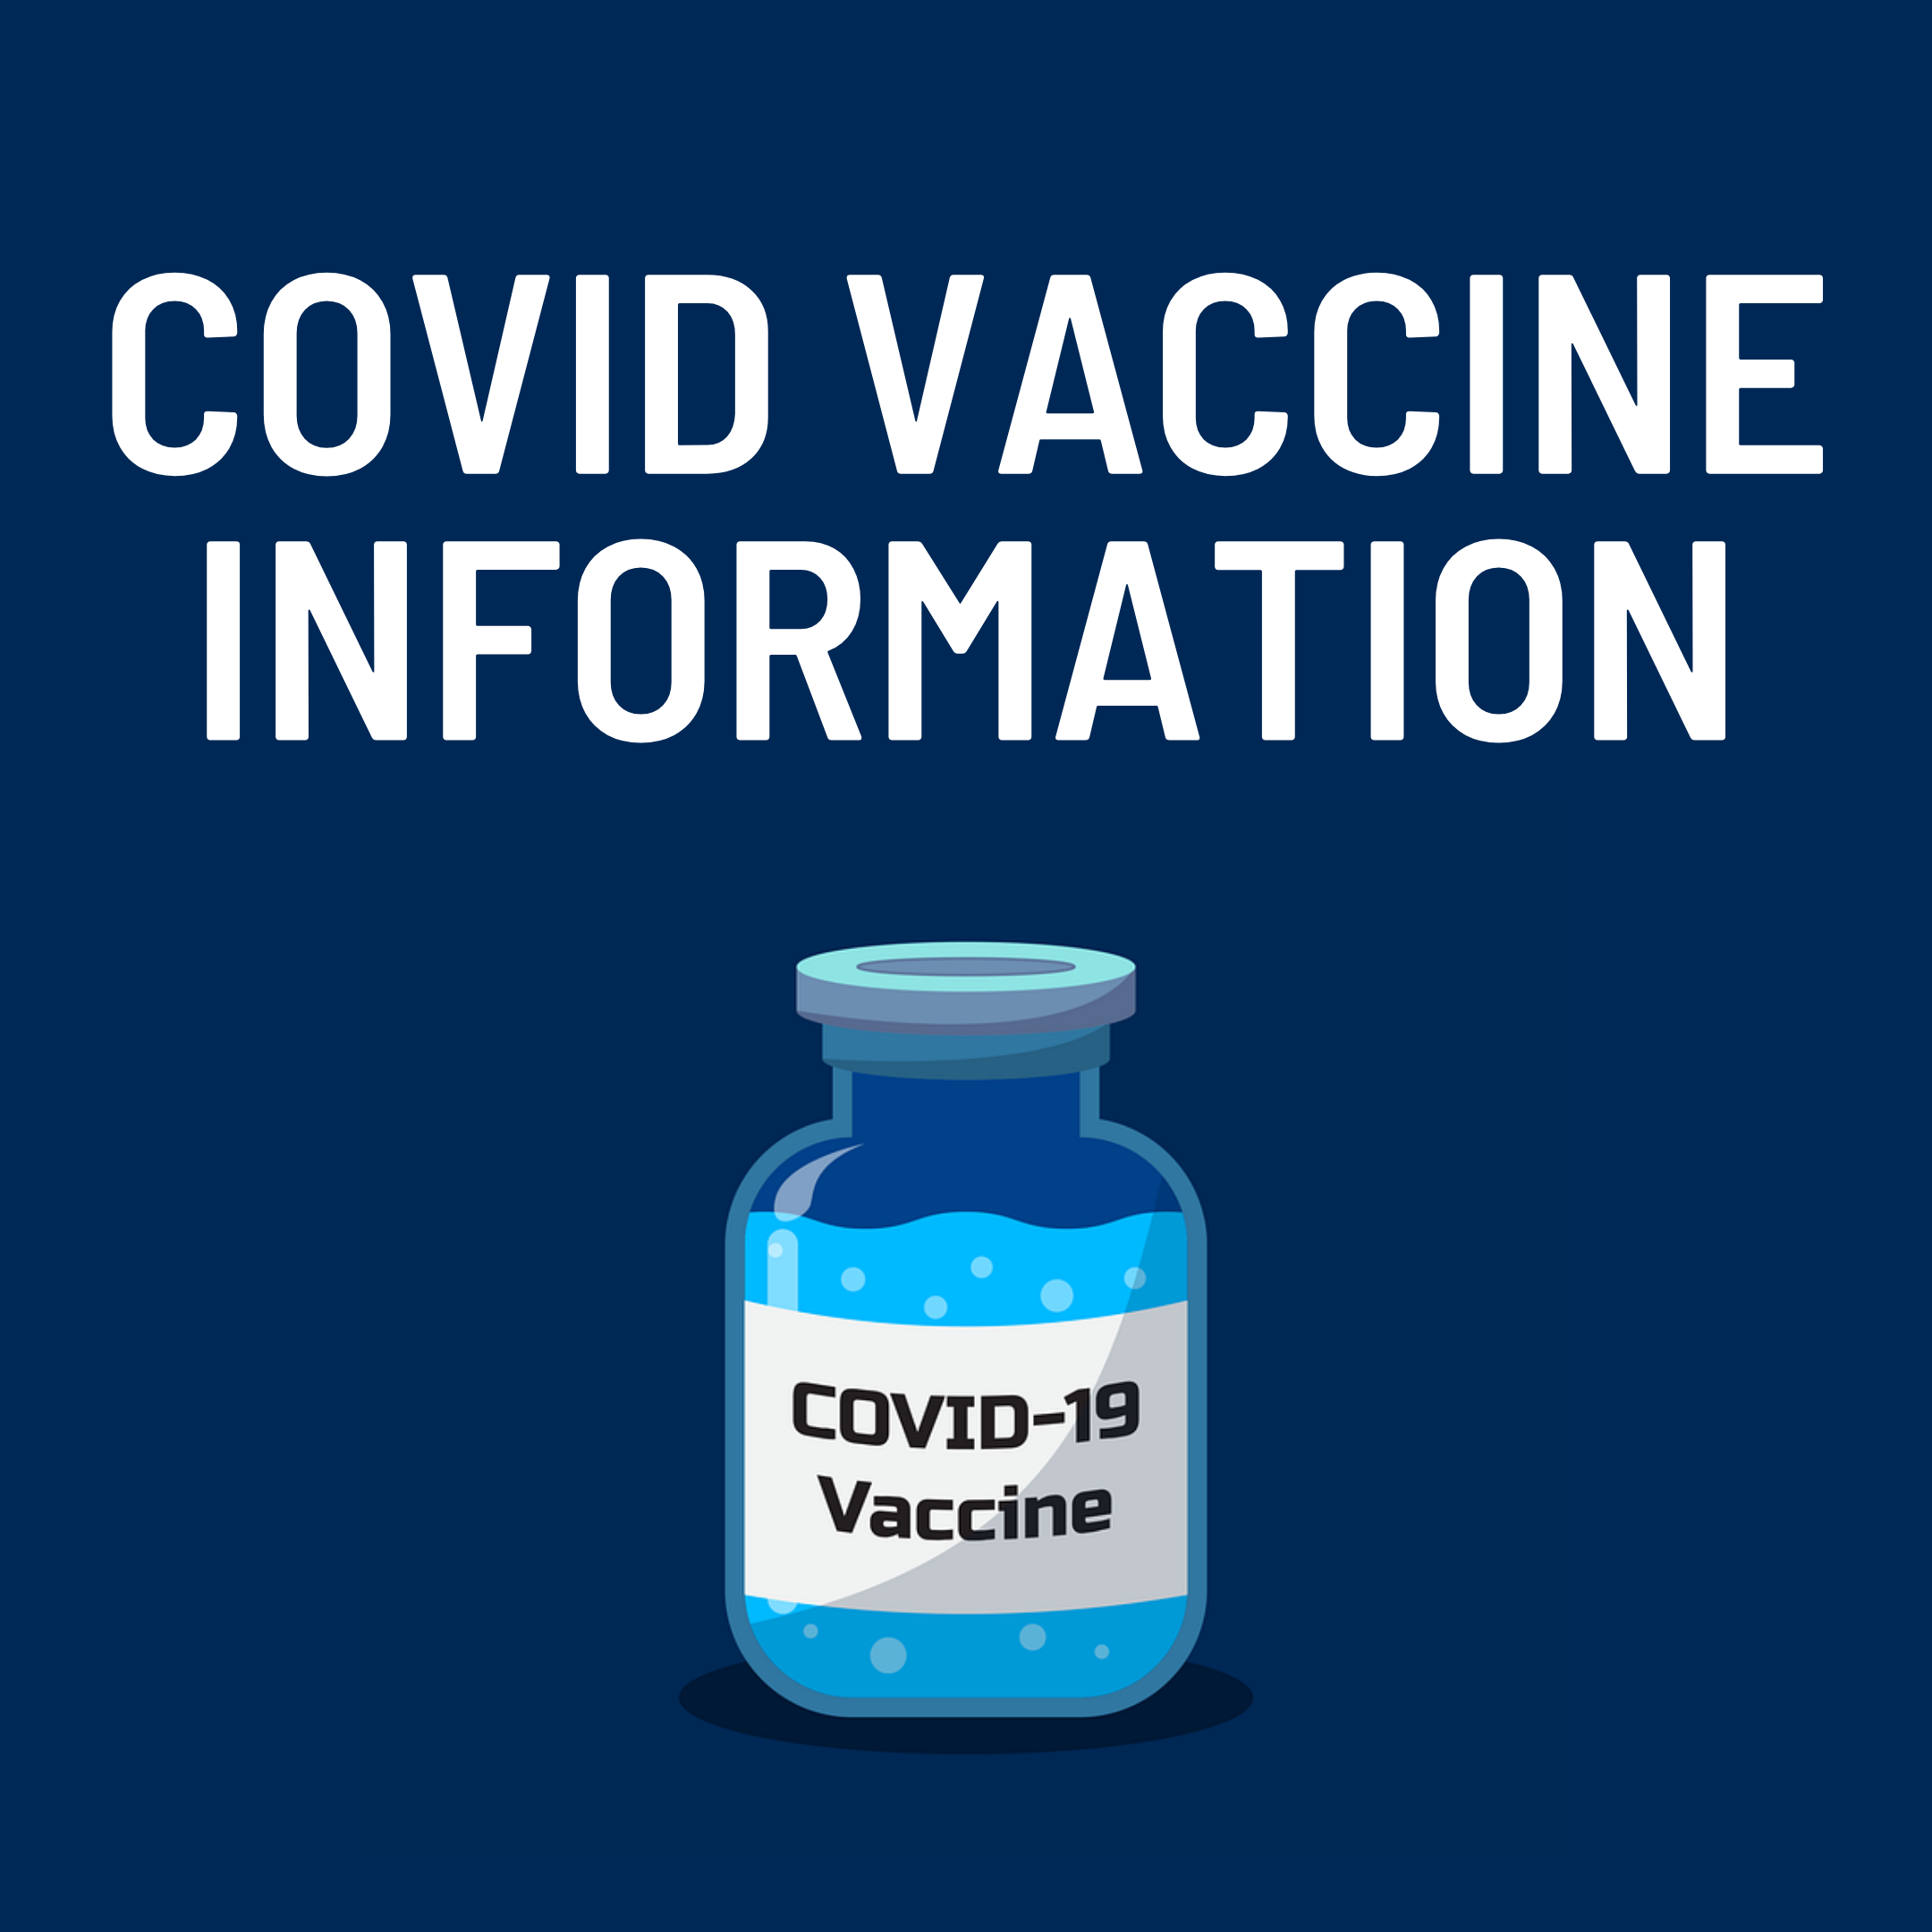 Text that reads "COVID Vaccine Information" on a navy background with an illustration of a vaccine vial.